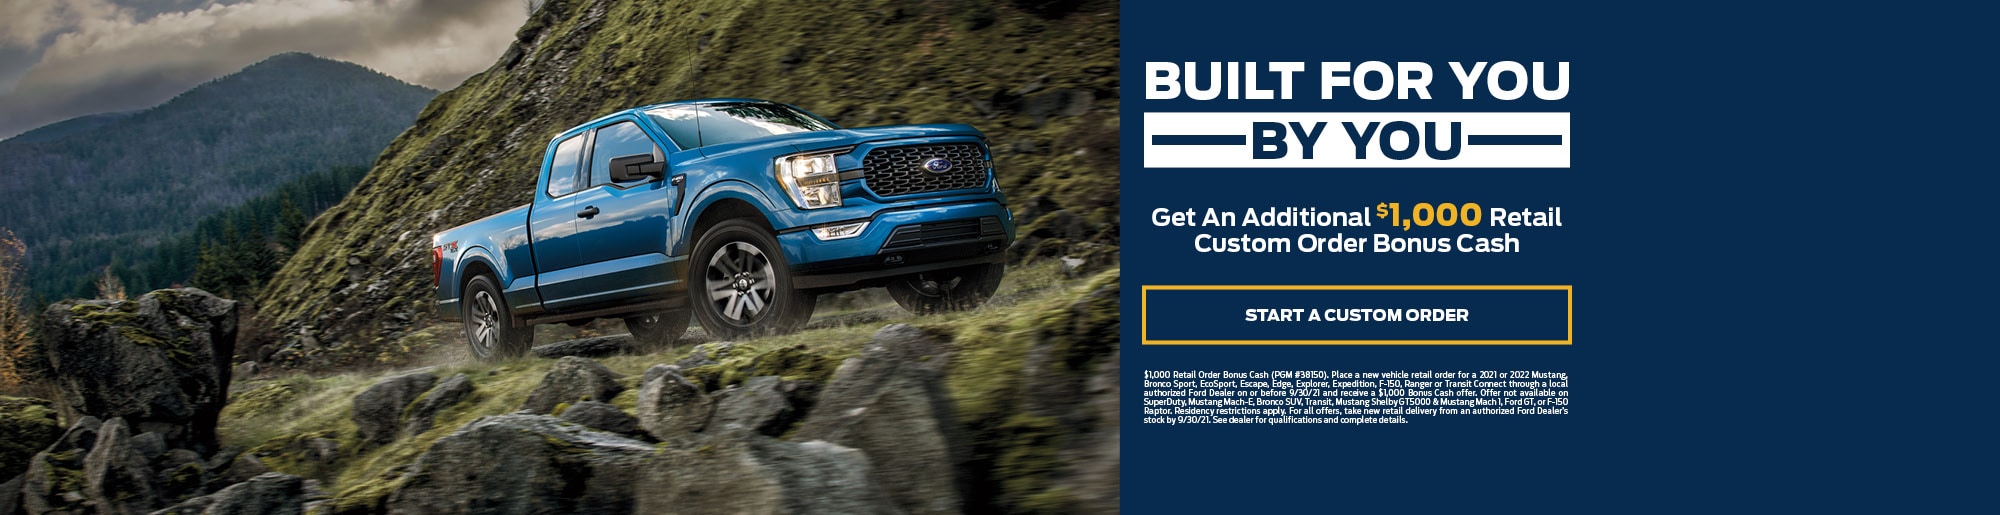 Titus-Will Ford | Ford Dealer in Tacoma, WA